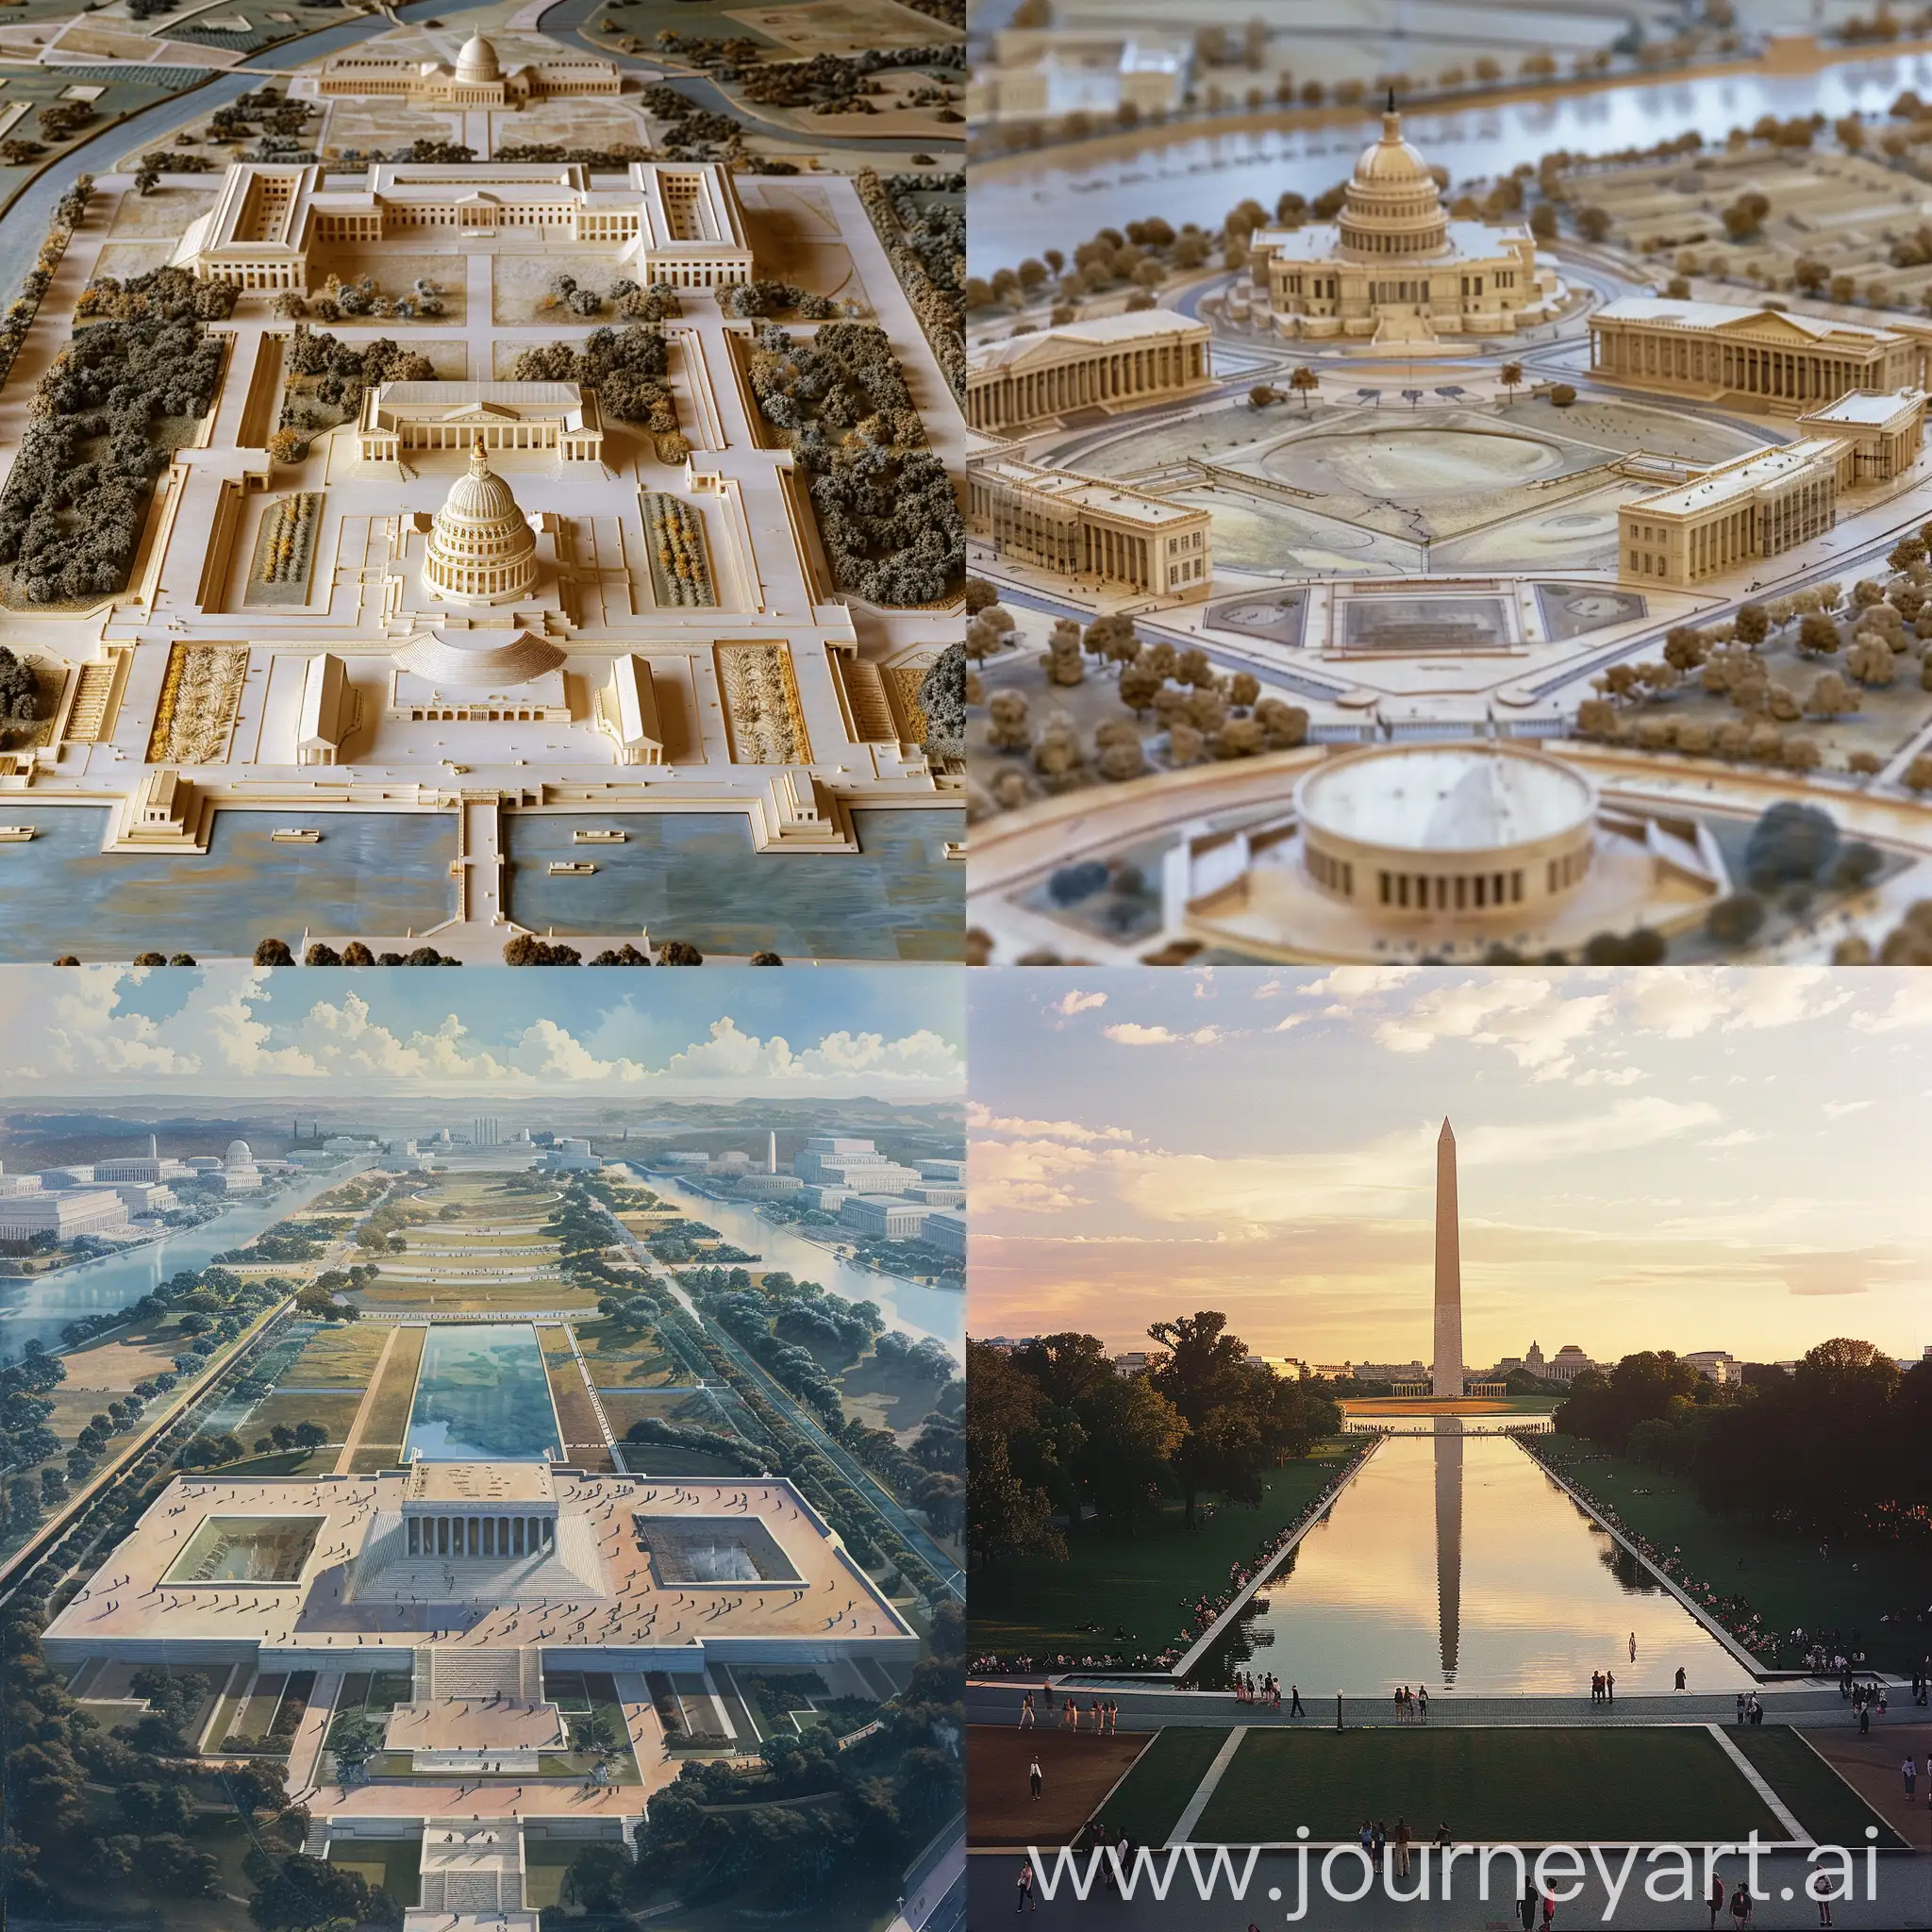 Established in 1790, D.C. became the capital to promote unity among the states. Its grand design by Pierre L'Enfant reflects the aspirations of a growing nation. Scale 9:16